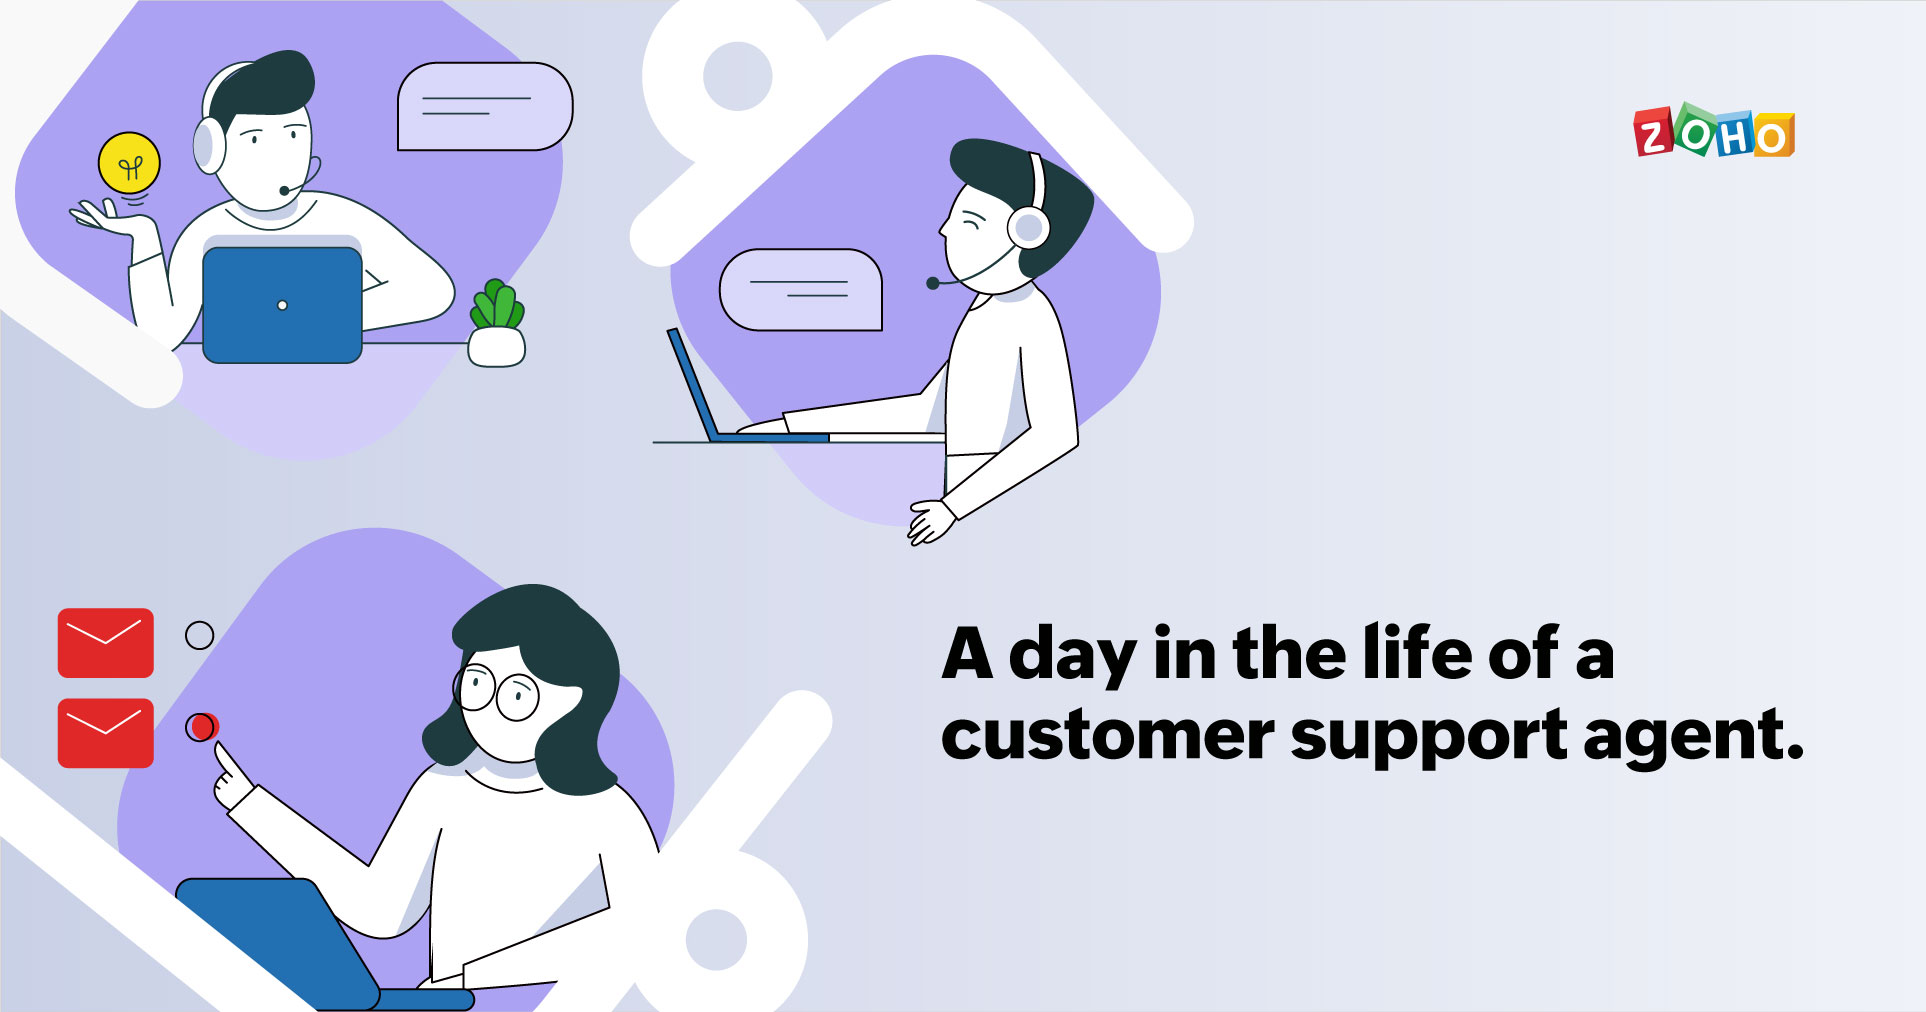 Collaboration through TeamInbox: How customer support teams can improve their customer experience